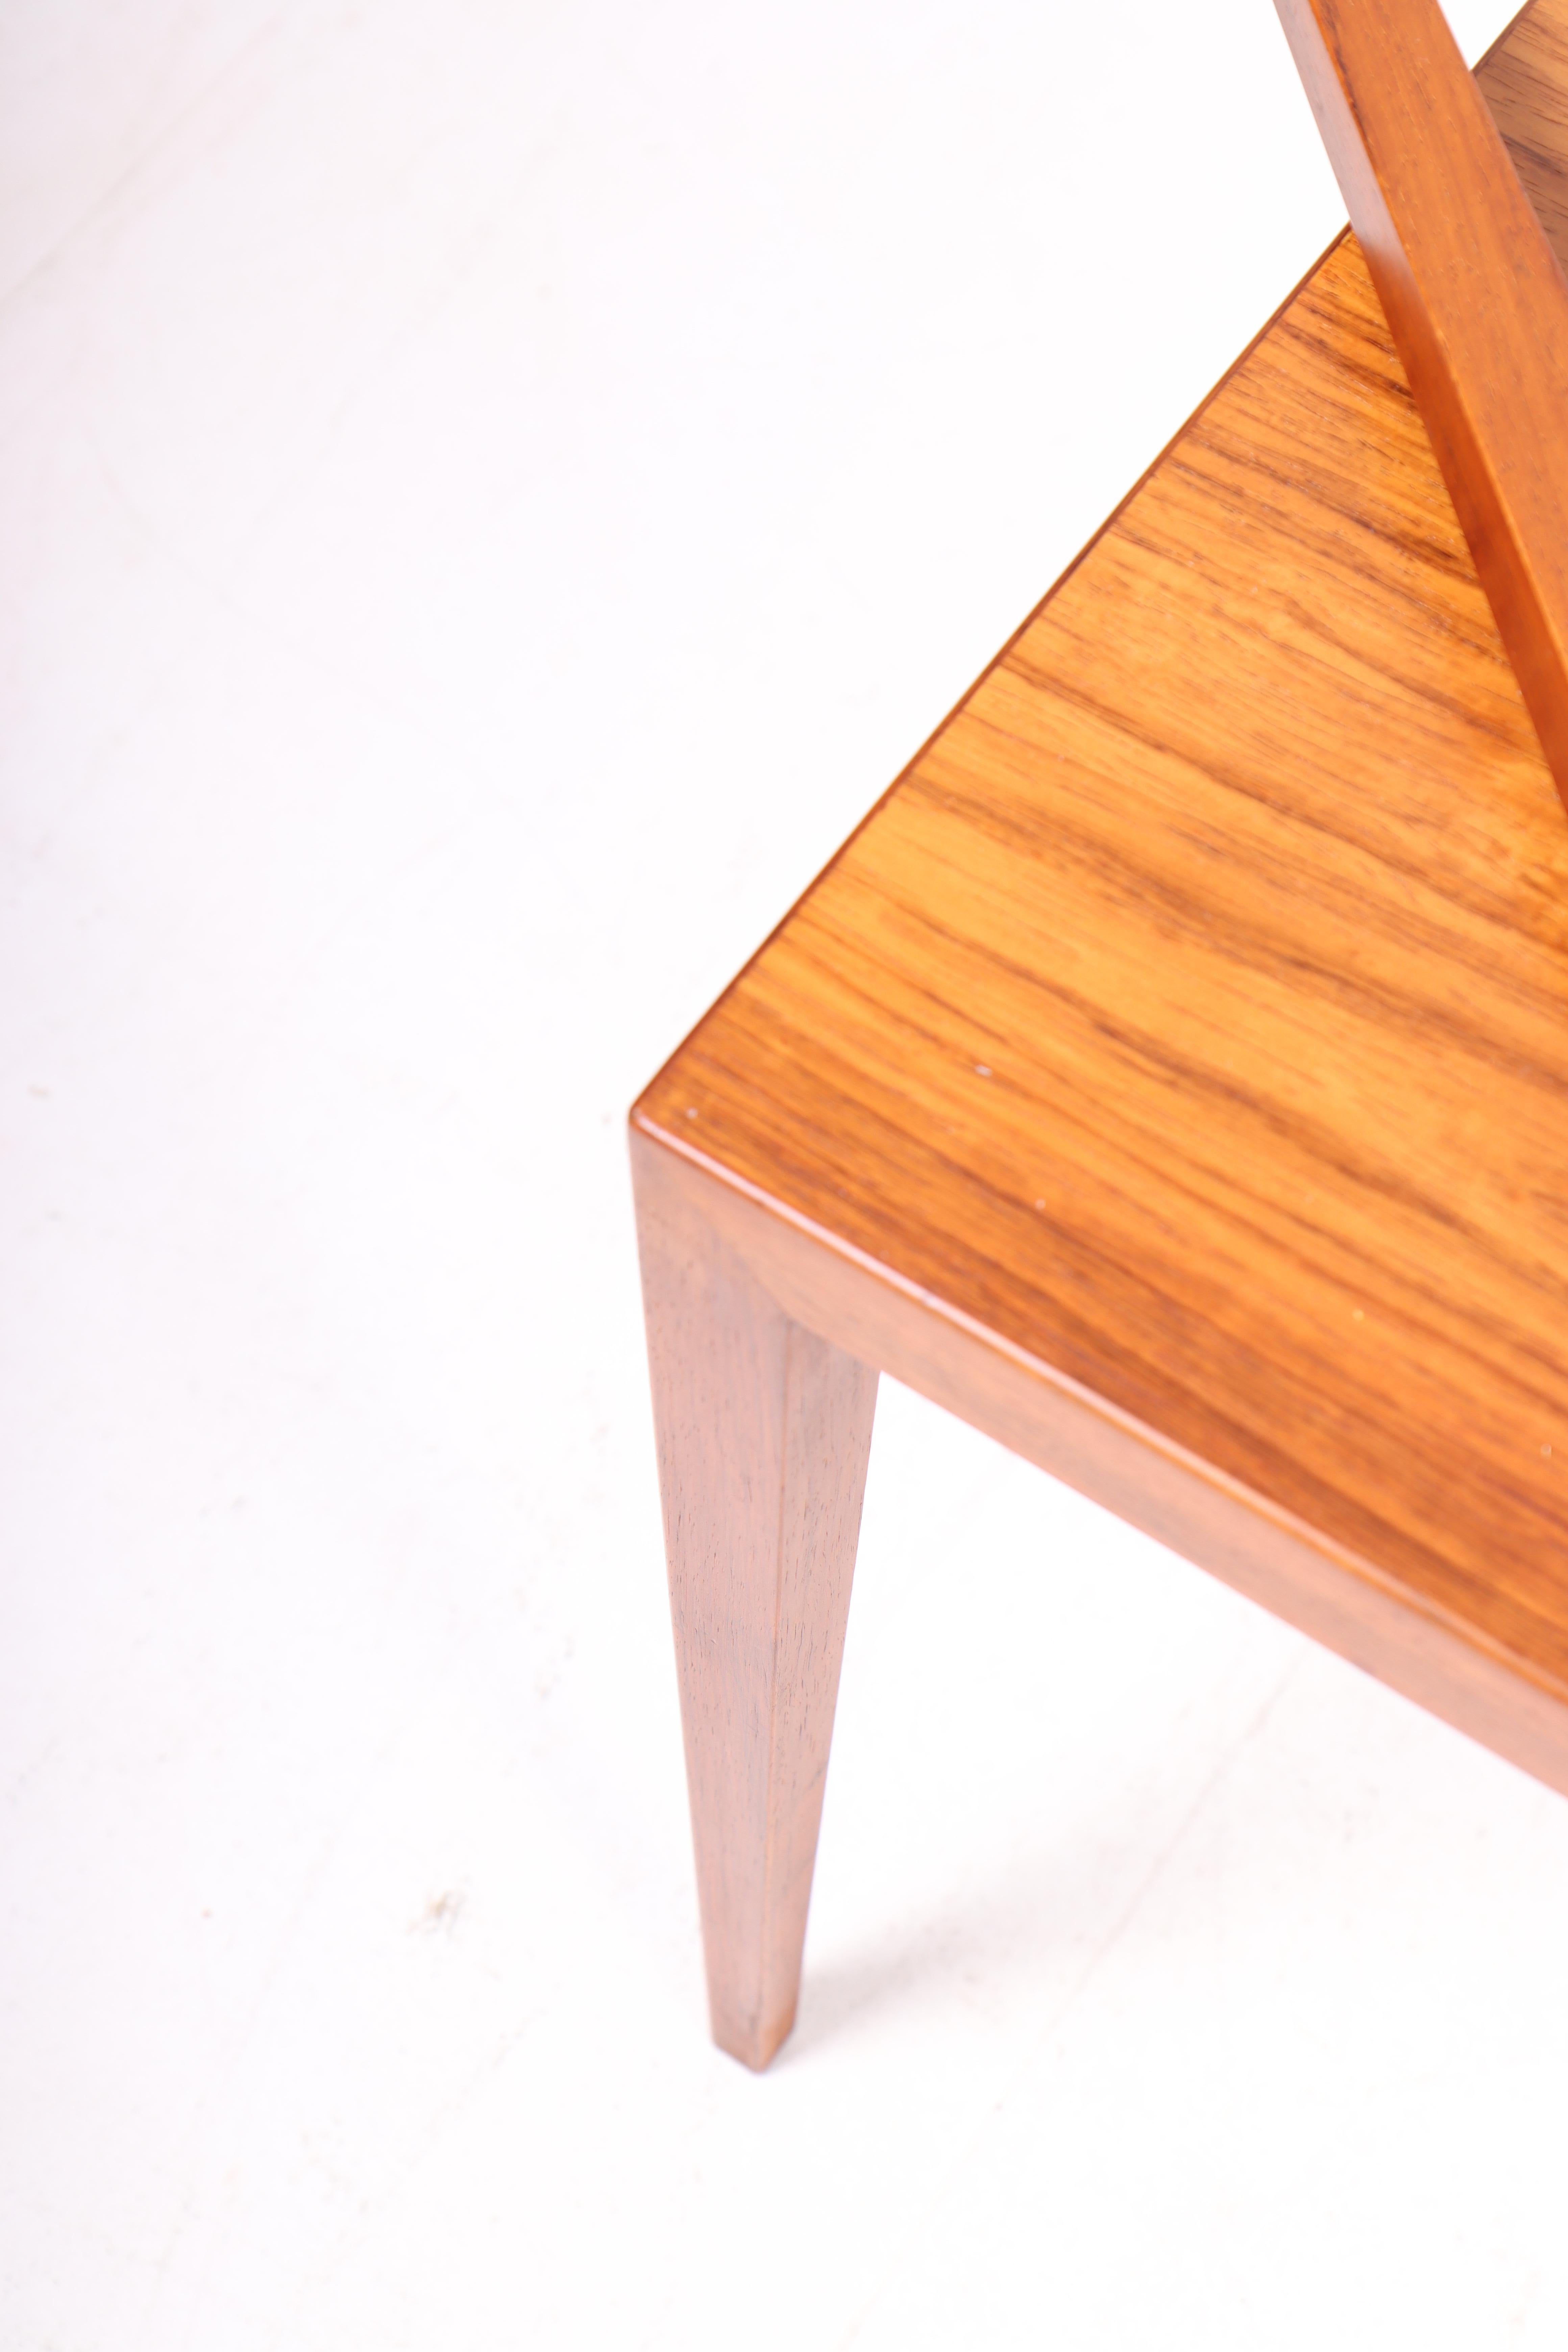 Pair of Midcentury Side Tables in Rosewood by Haslev, Danish Design, 1960s For Sale 3